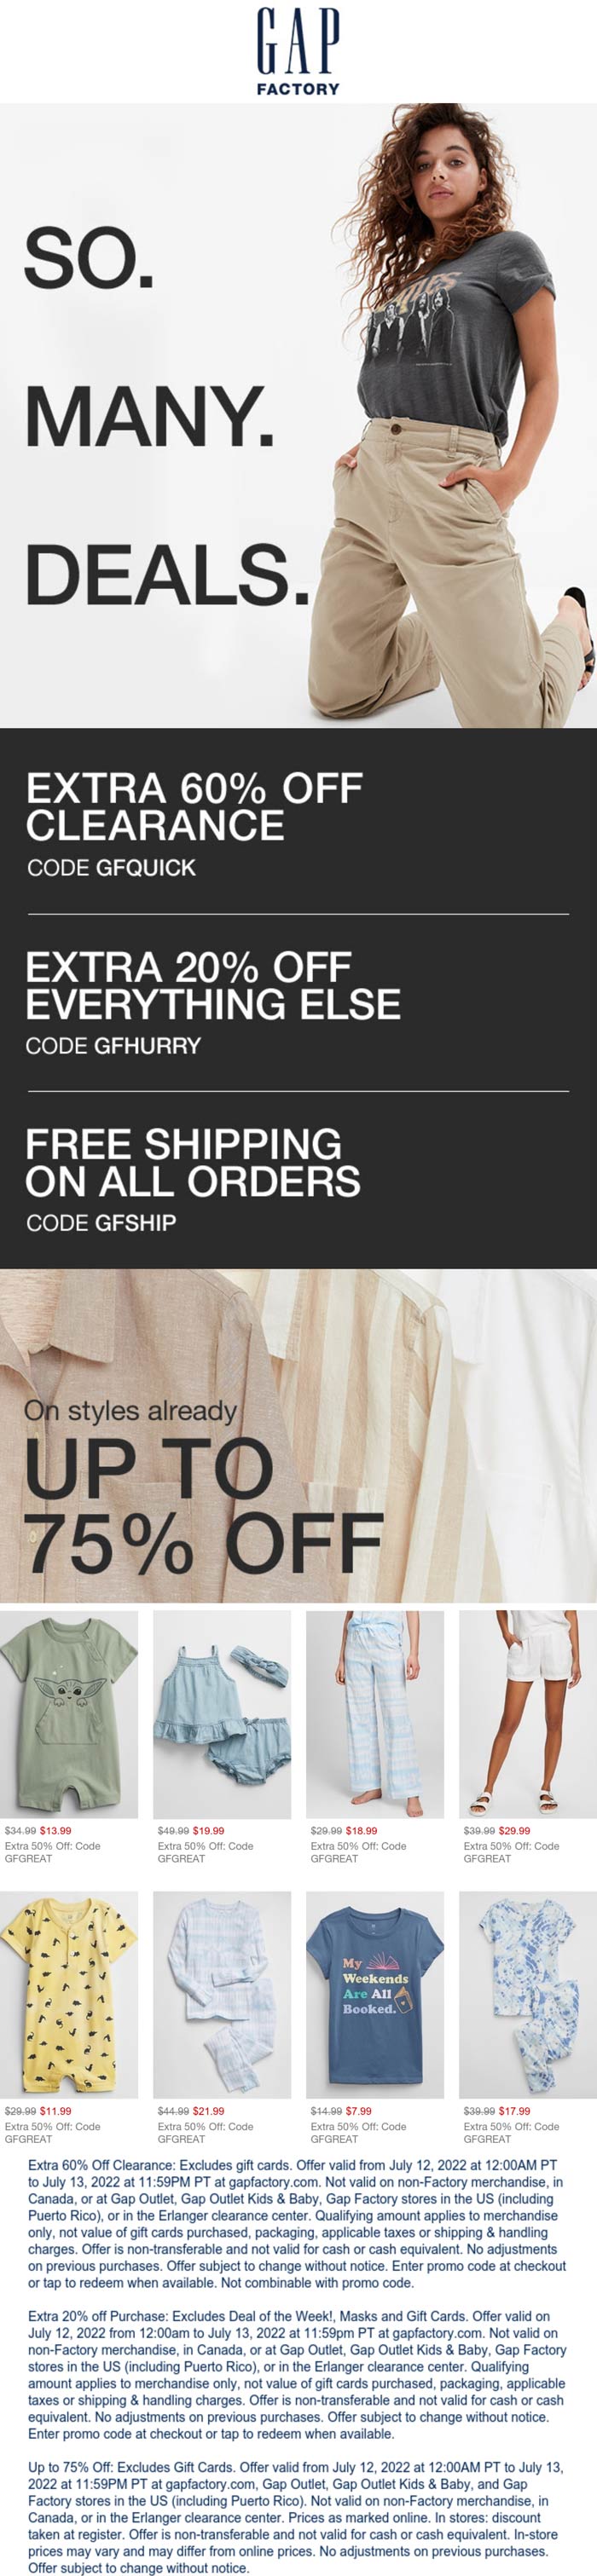 Gap Factory stores Coupon  20% off everything & 60% off clearance online at Gap Factory via promo code GFHURRY #gapfactory 